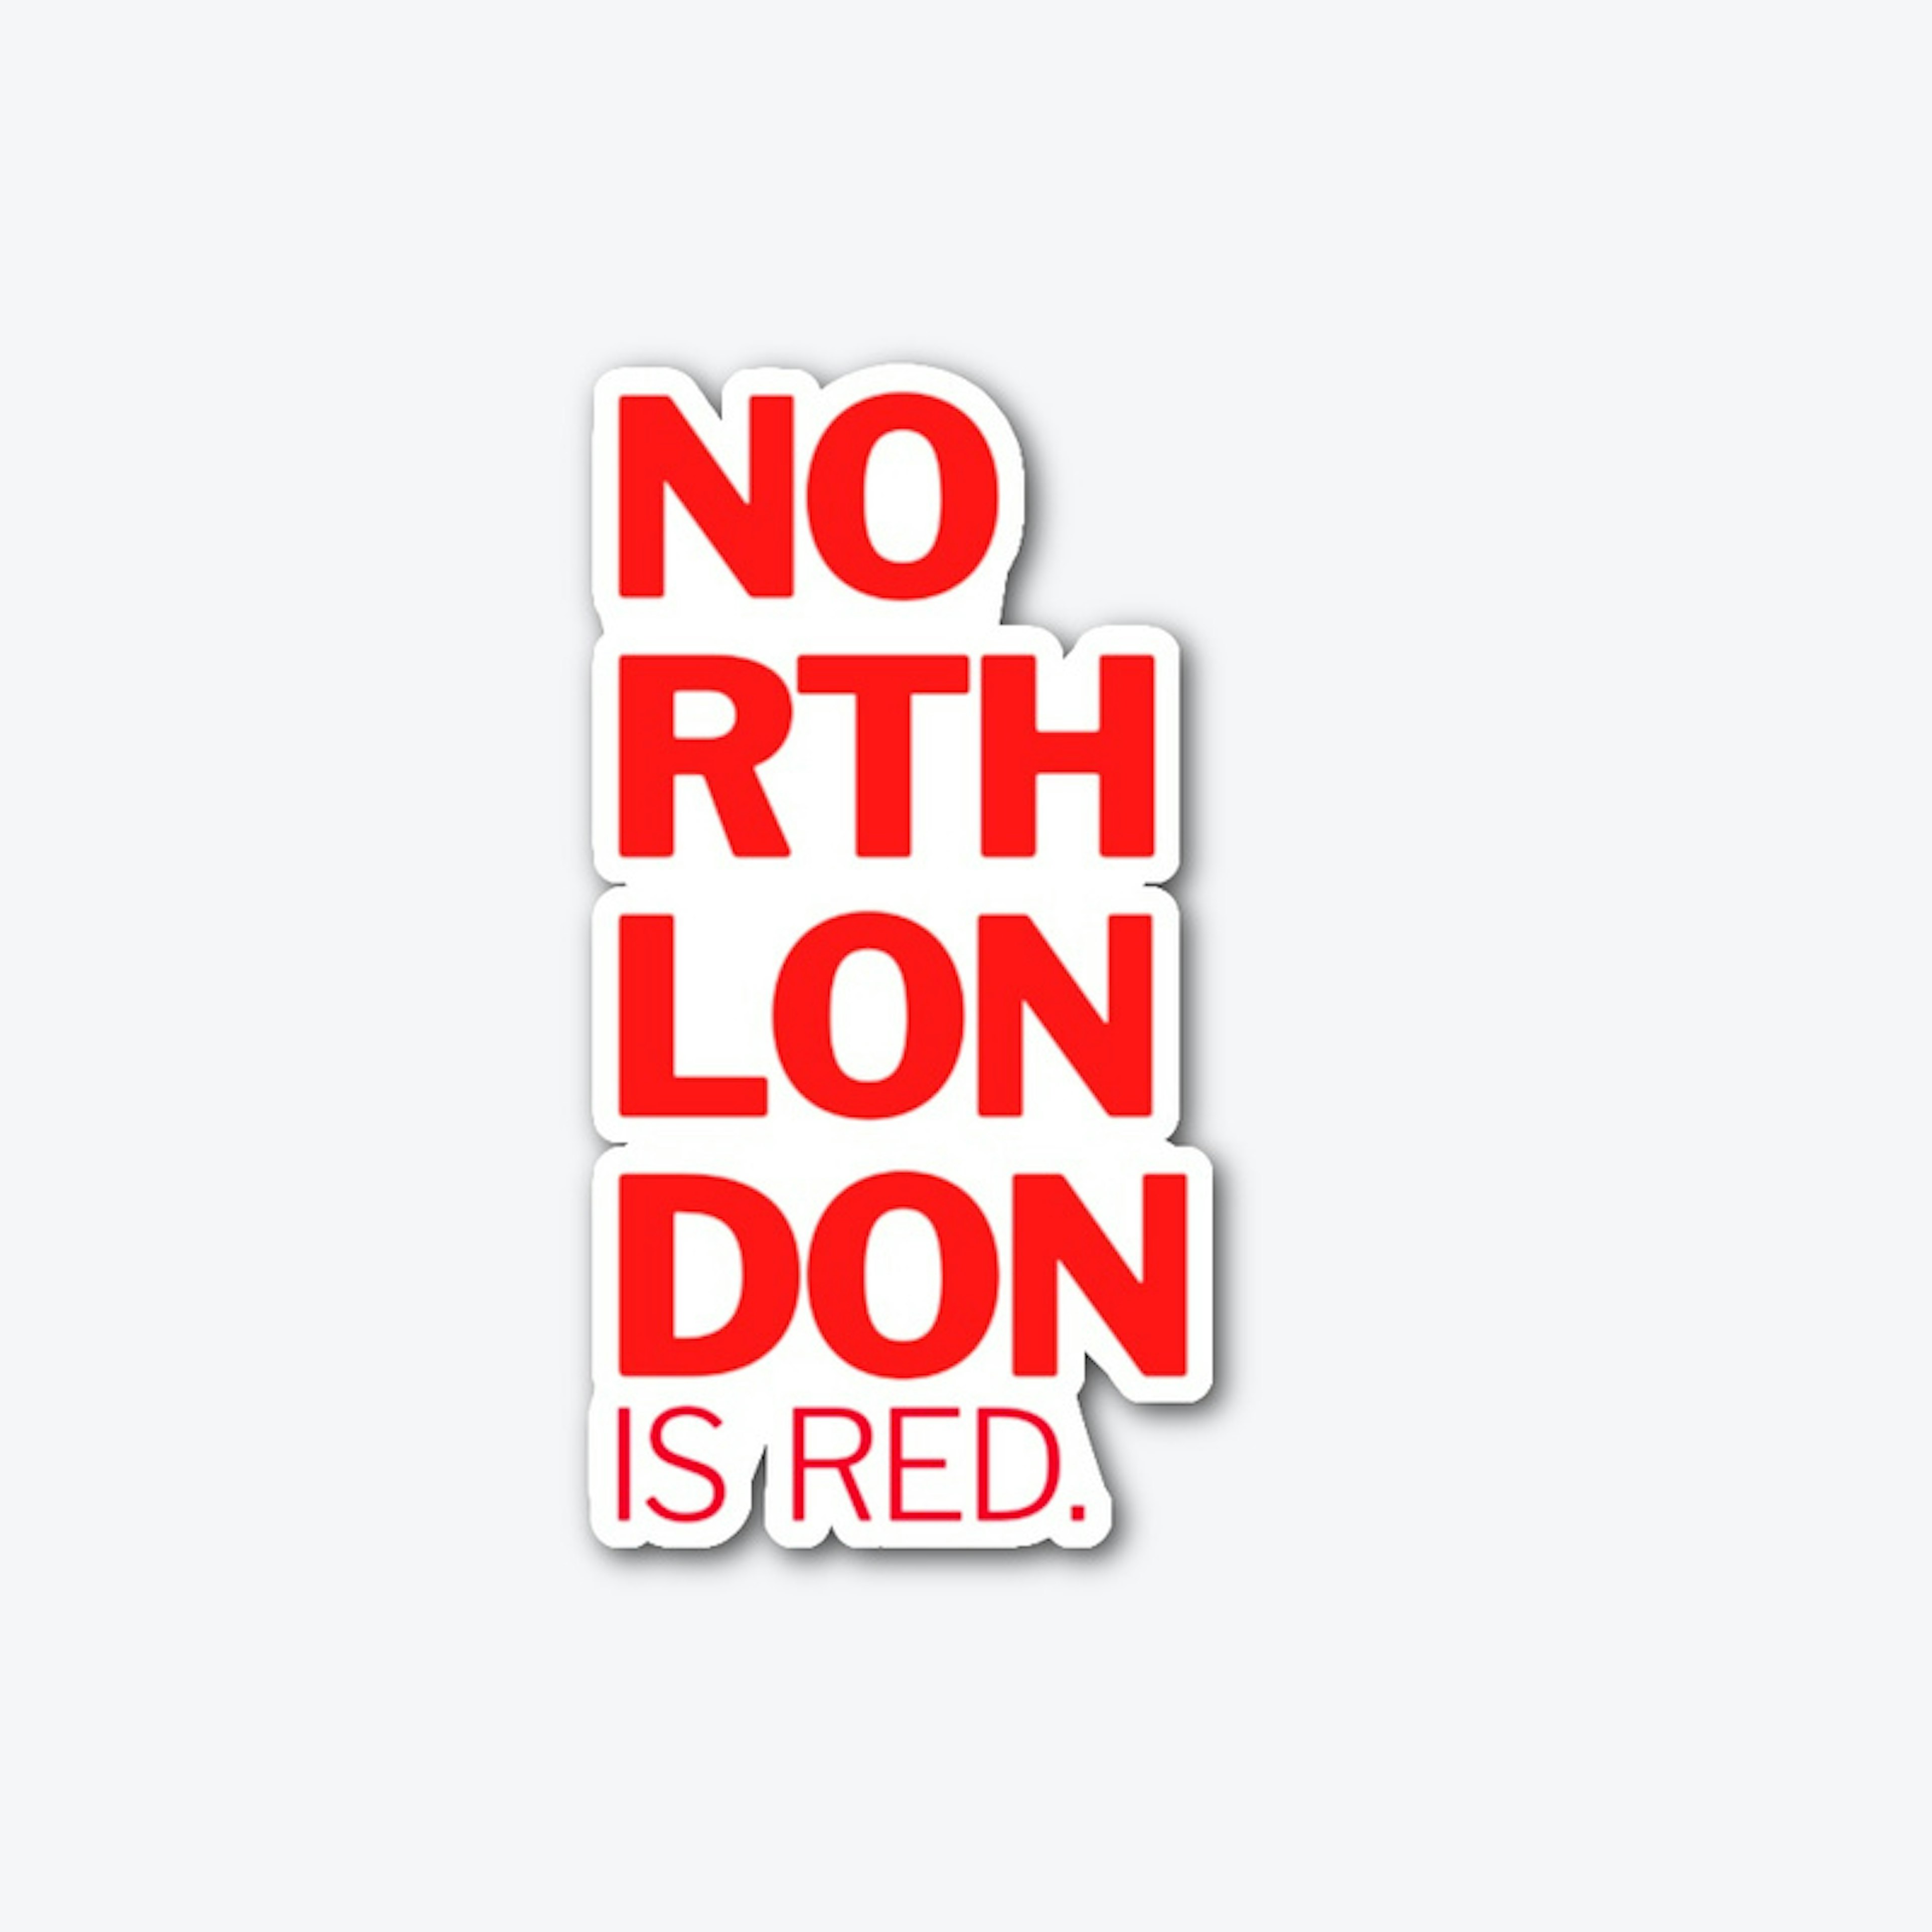 North London is Red